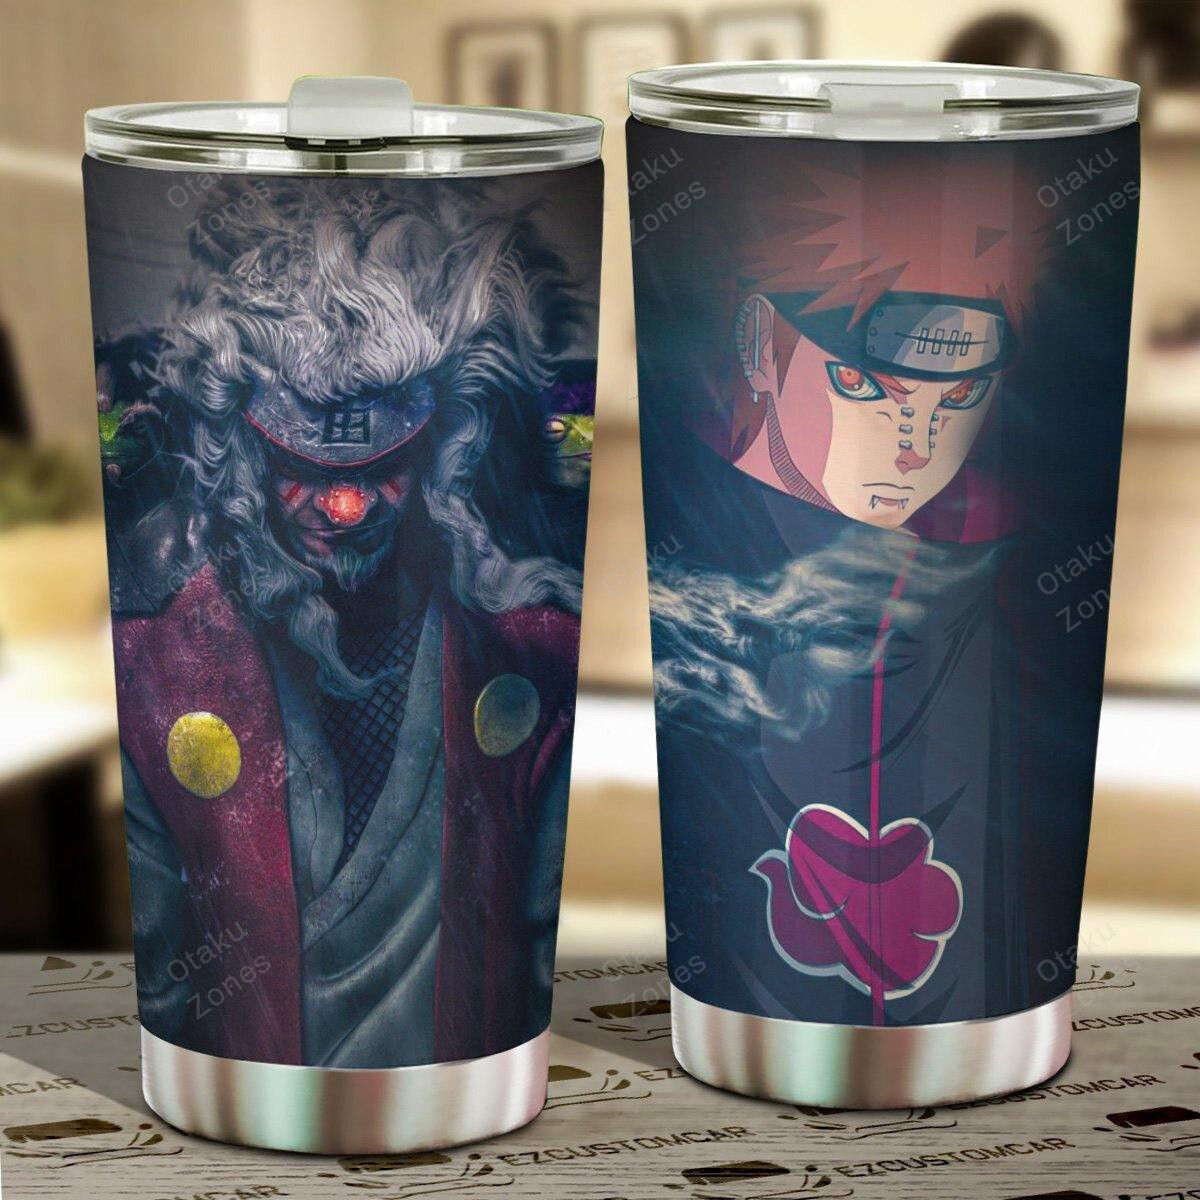 The Top 100+ Sales tumbler in 2022 92